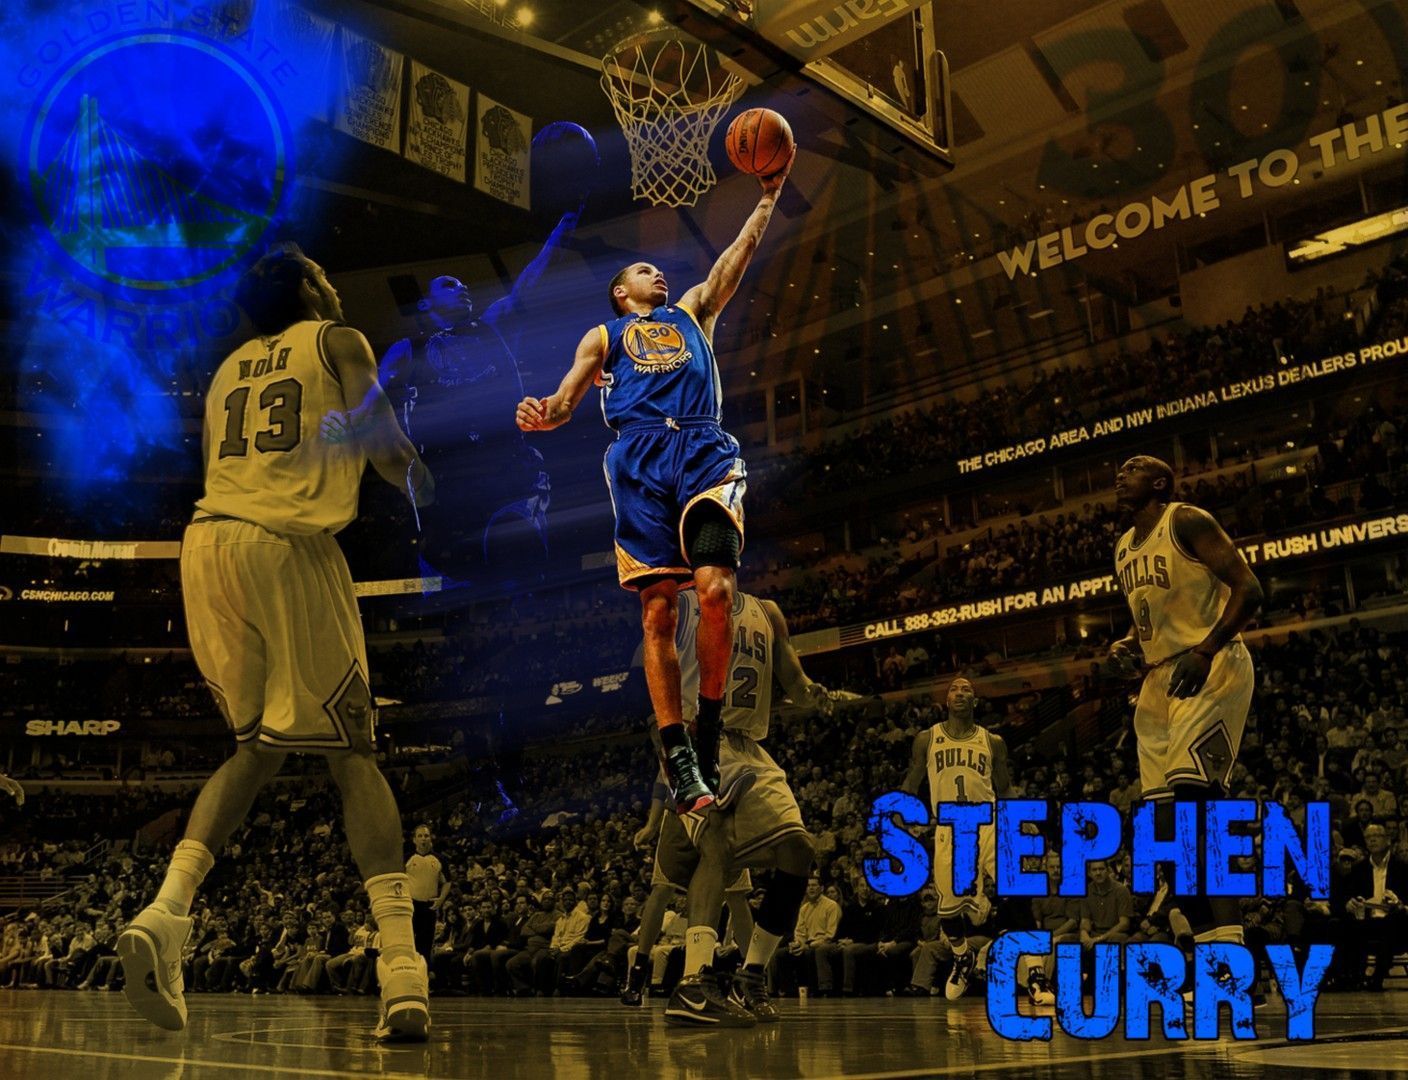 Stephen Curry Splash HD Wallpaper and Photos | Cool Wallpapers